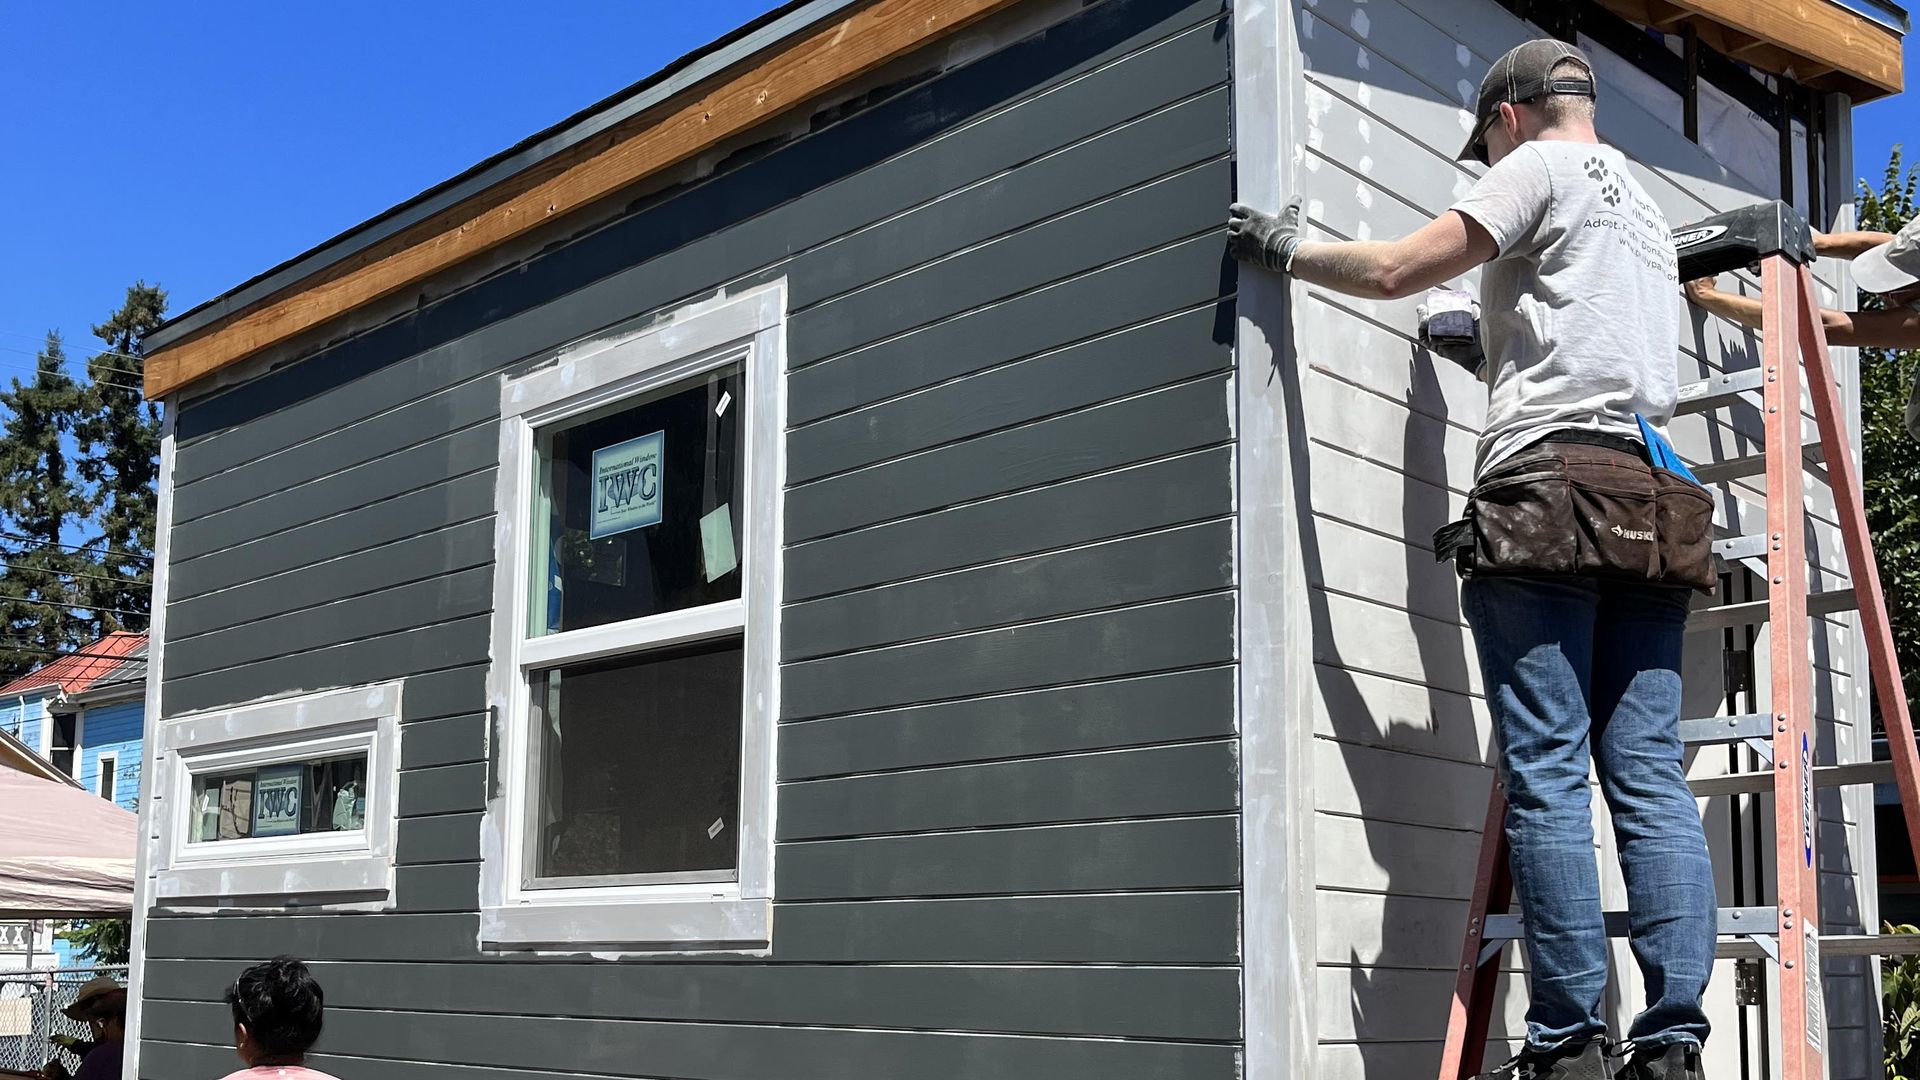 A person on a ladder works on a tiny house painted grey.